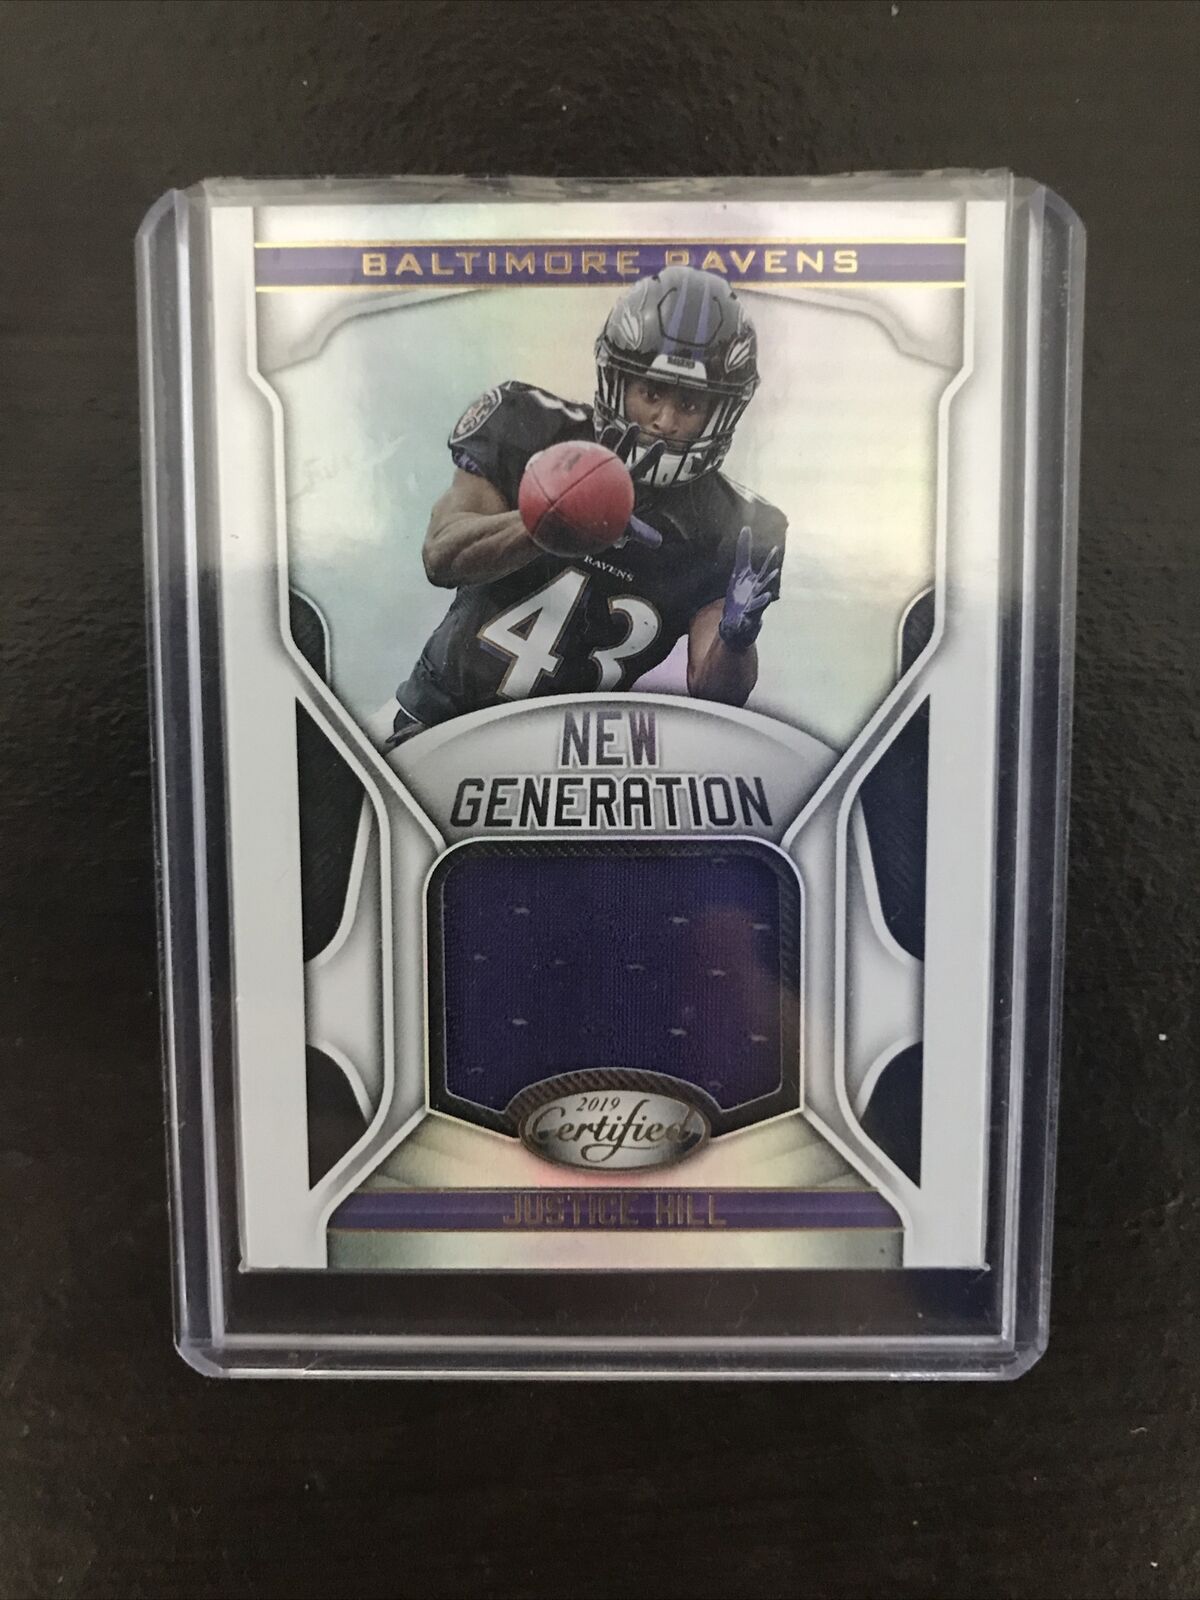 2019 Justice Hill jersey patch new generation Panini